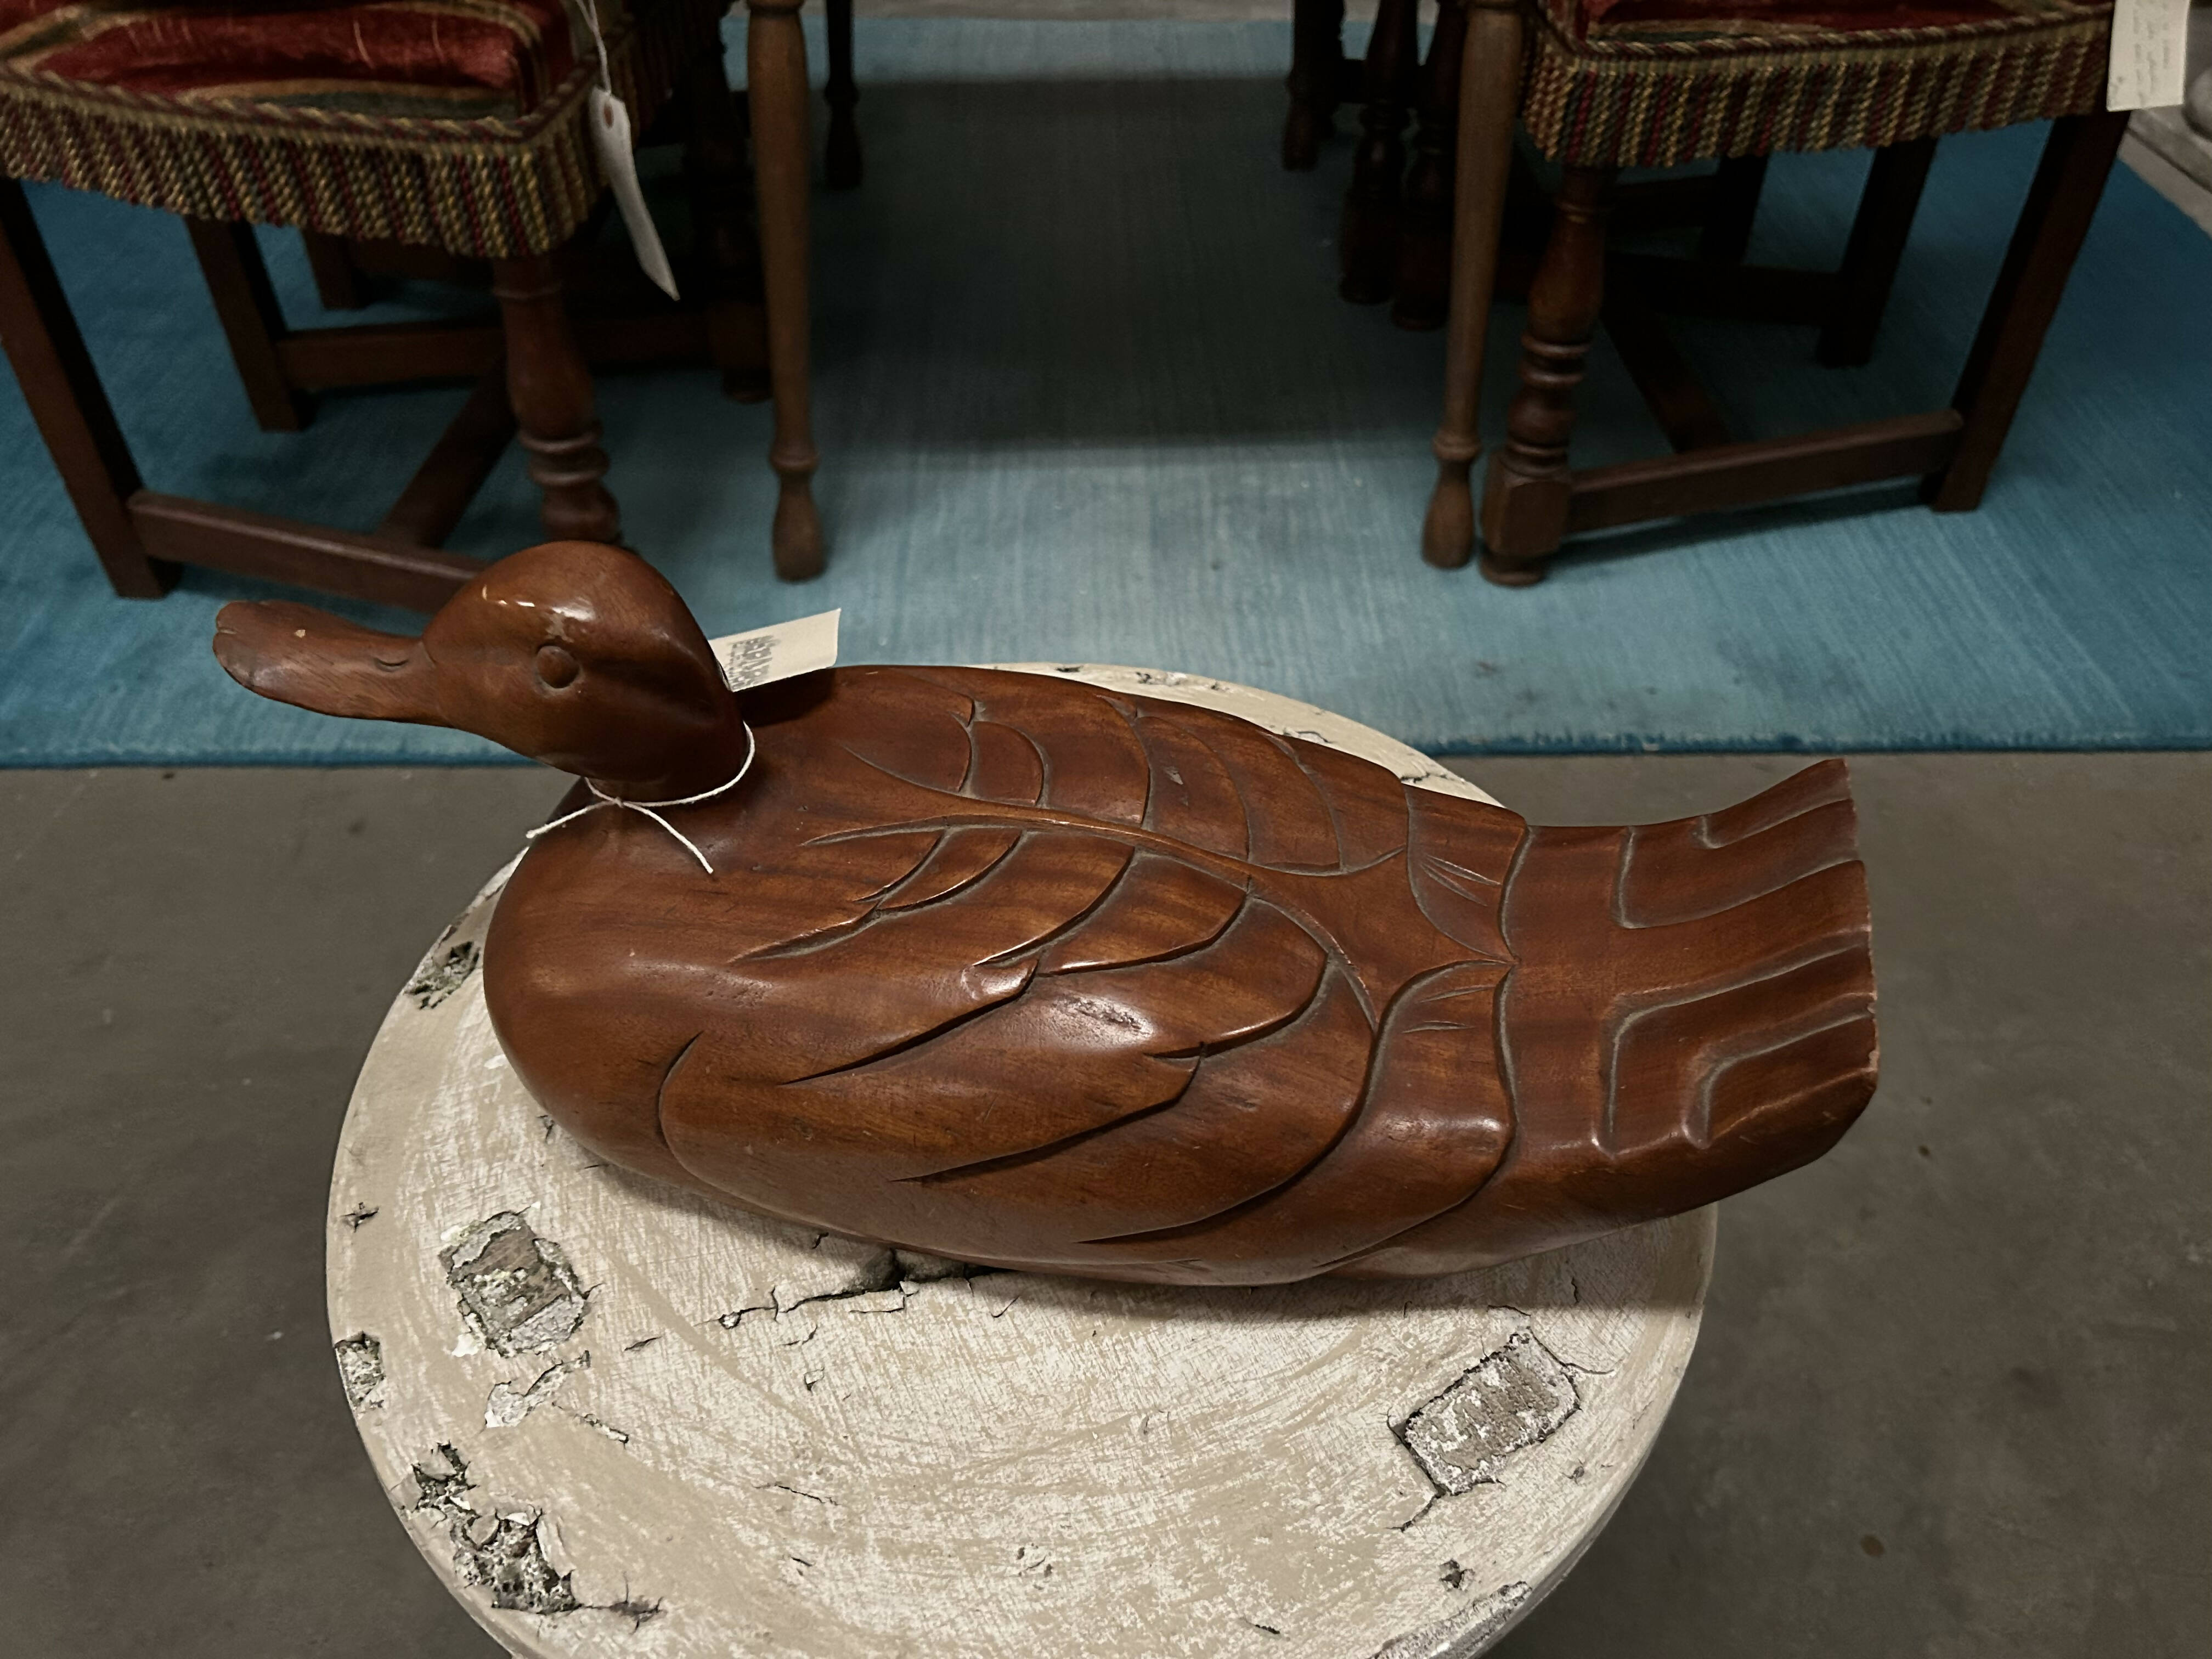 Carved wood duck